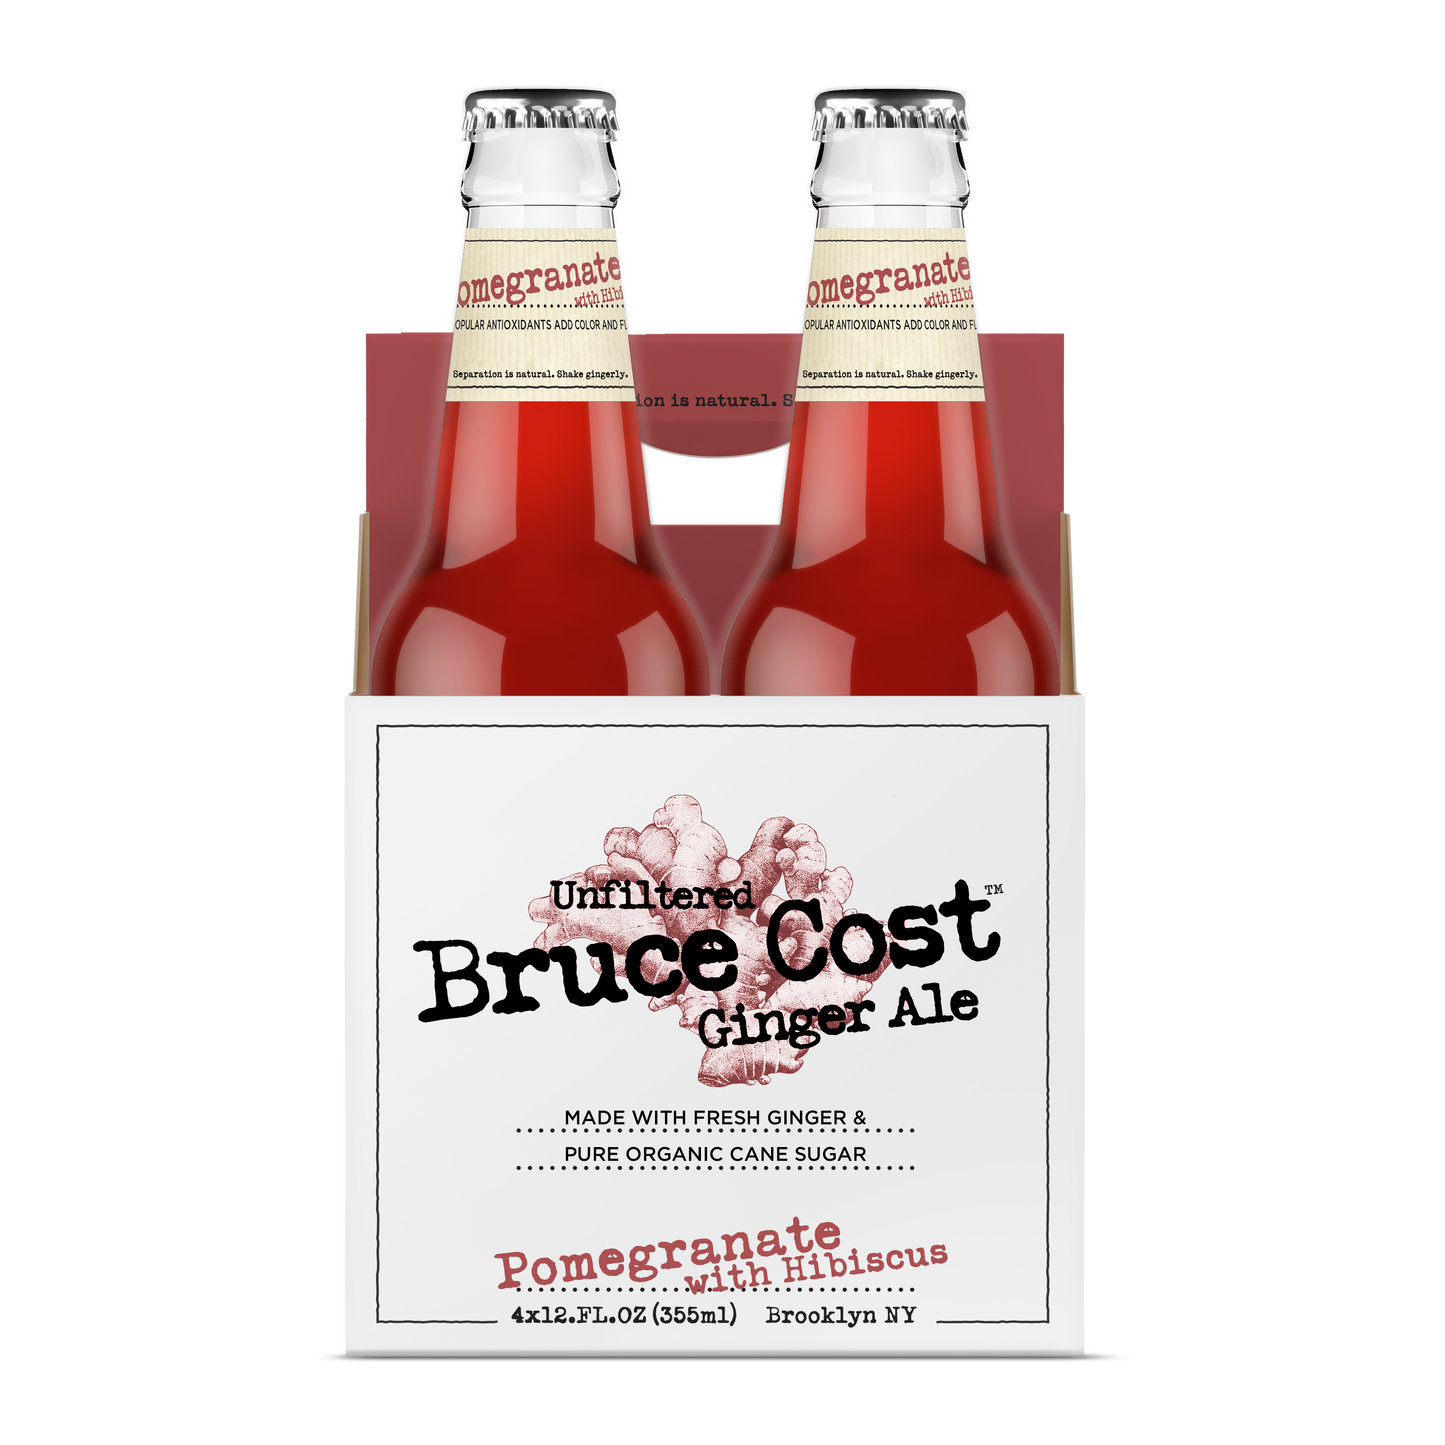 Bruce Cost Ginger Ale - Pomegranate with Hibiscus